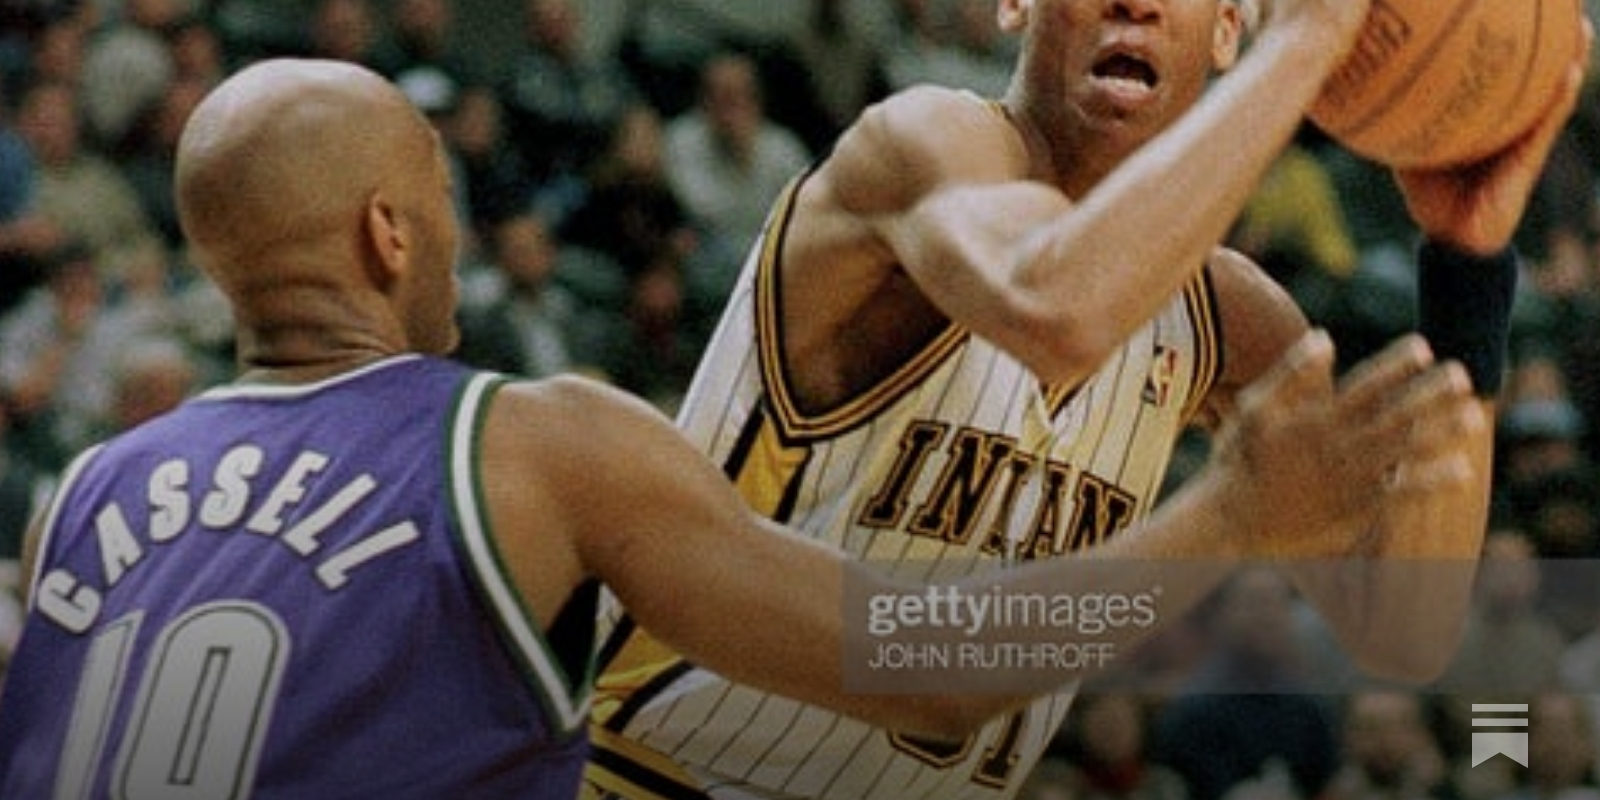 Almost Upset: Bucks-Pacers 2000 - by Curtis M. Harris